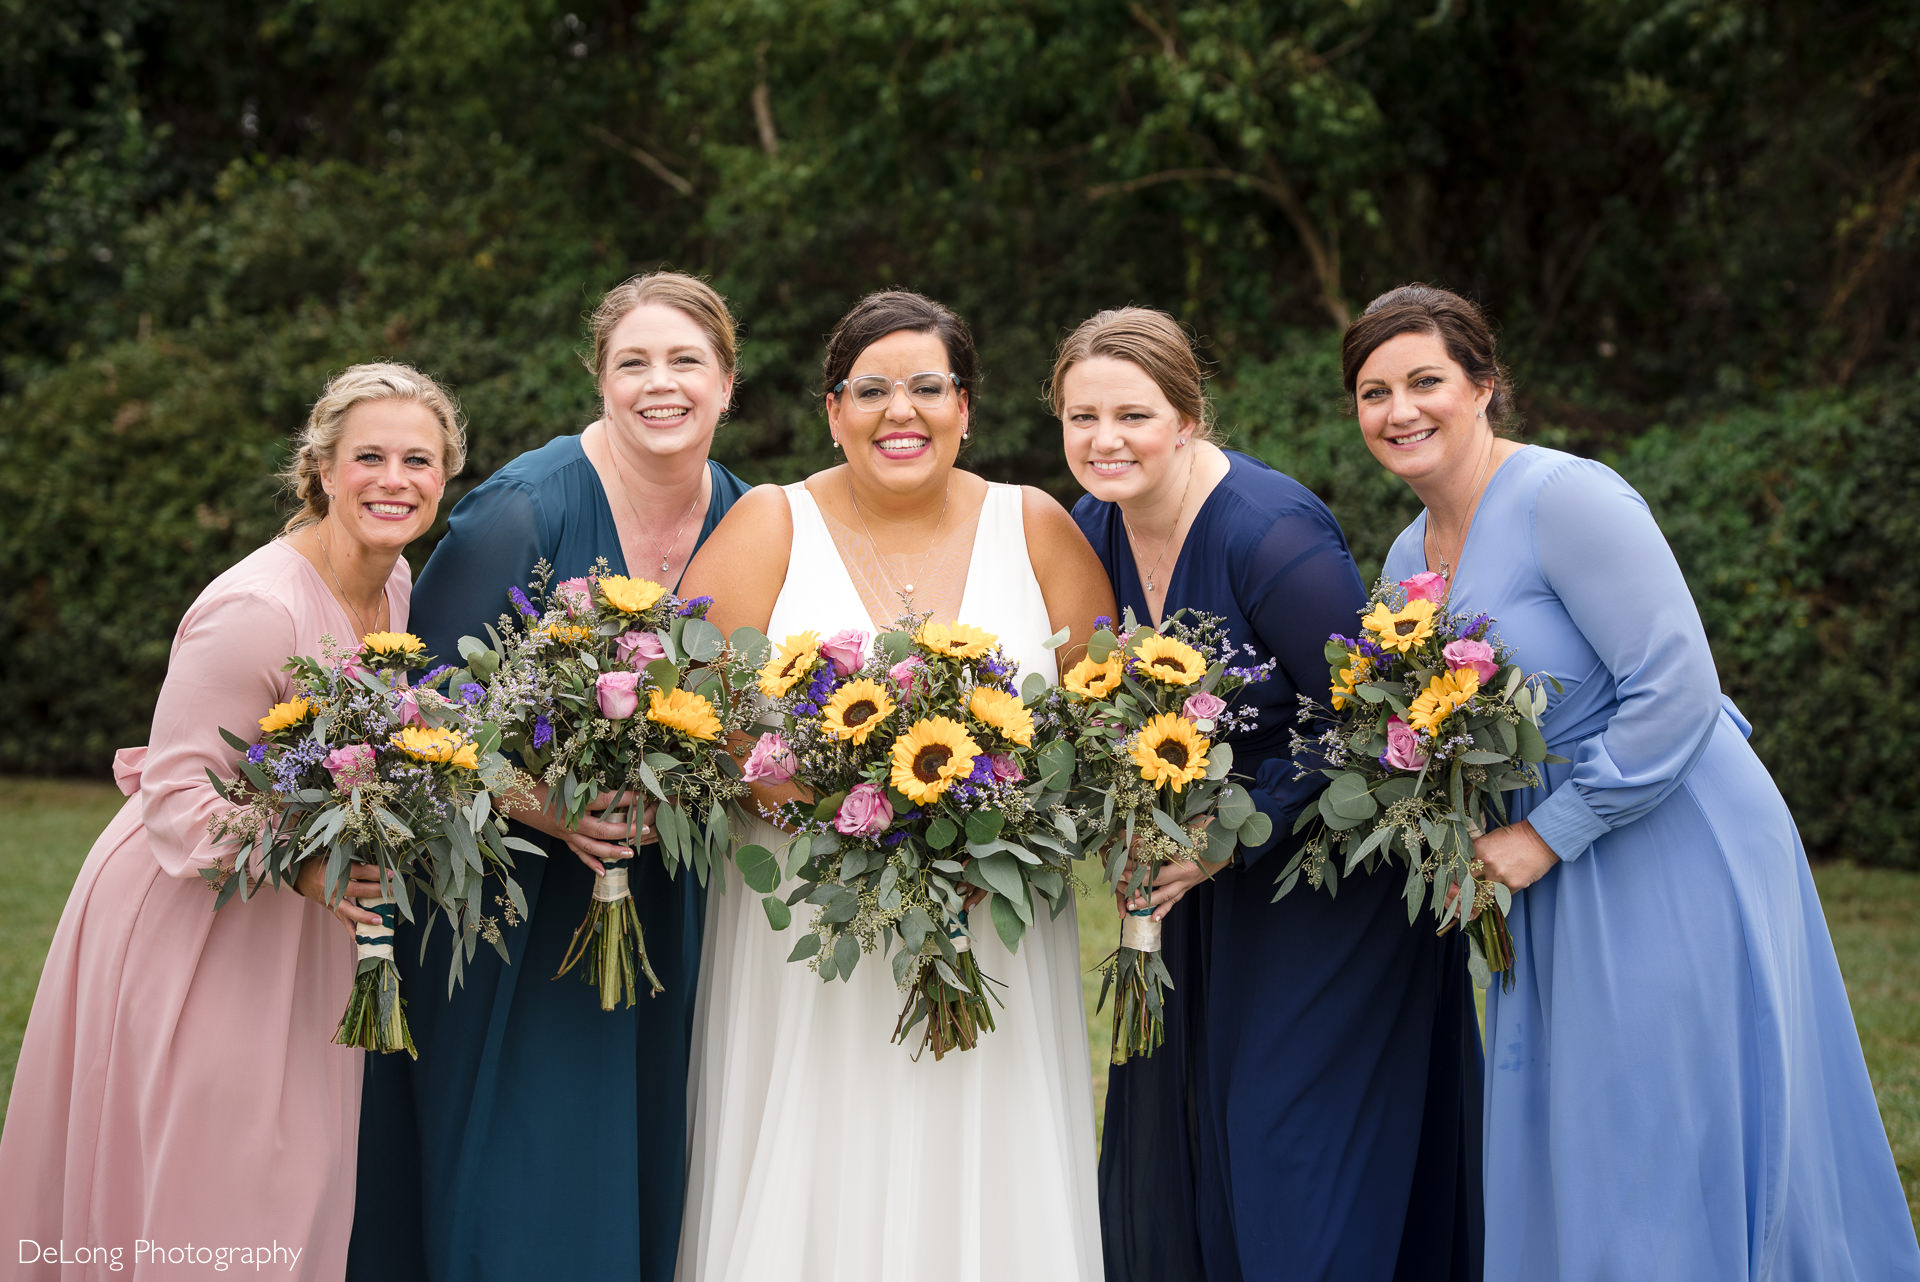 Bride and her bridesmaids holding colorful bouquets wearing colorful dresses at the Island House in Charleston, SC by Charlotte Wedding Photographers DeLong Photography